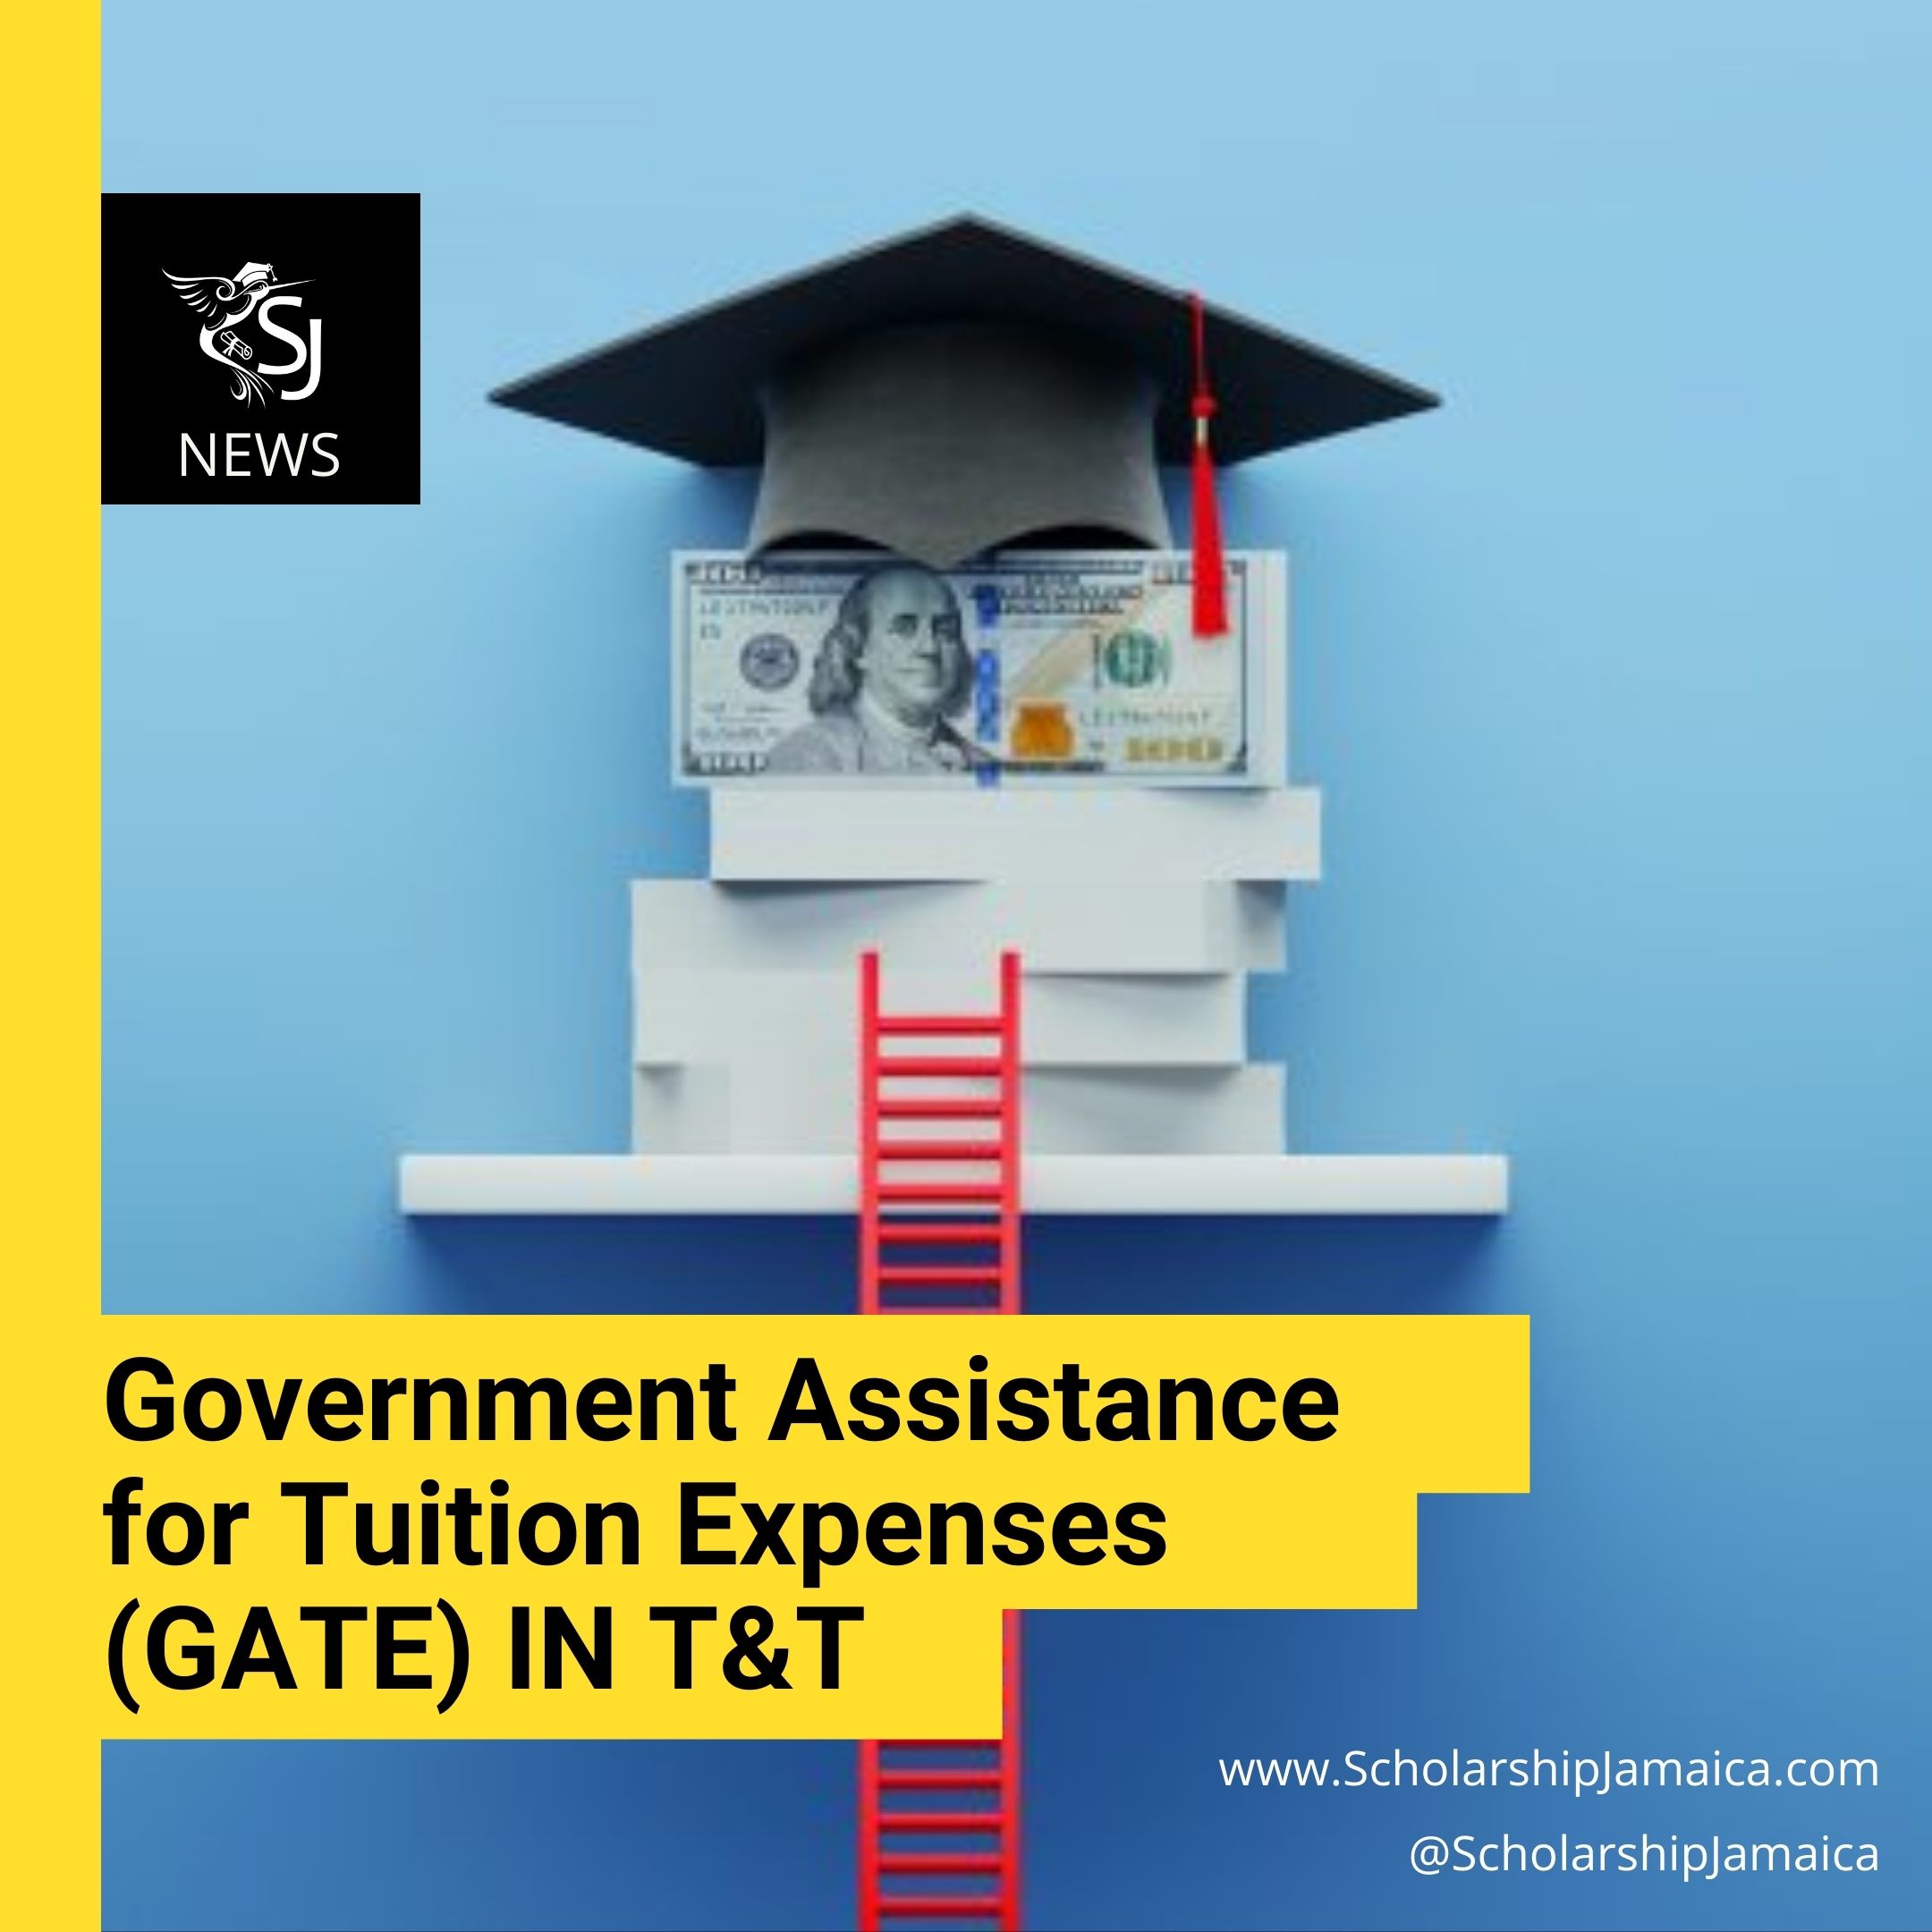 Trinidad & Tobago will reduce the benefits of the Government Assistance for Tuition Expenses (GATE) allocated to secondary school students.